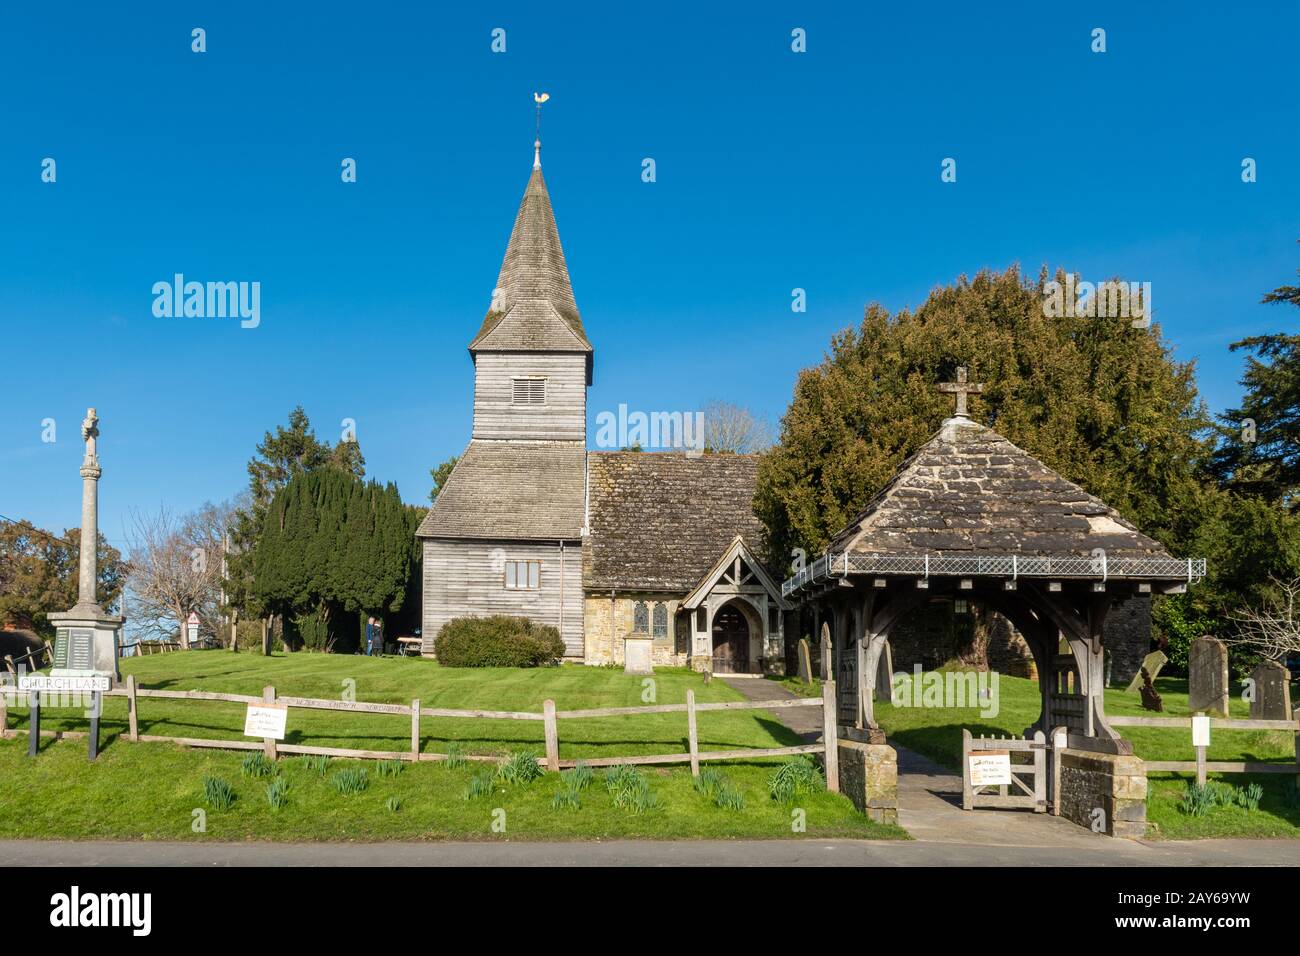 St Peters Church in the village of Newdigate, Surrey, UK Stock Photo